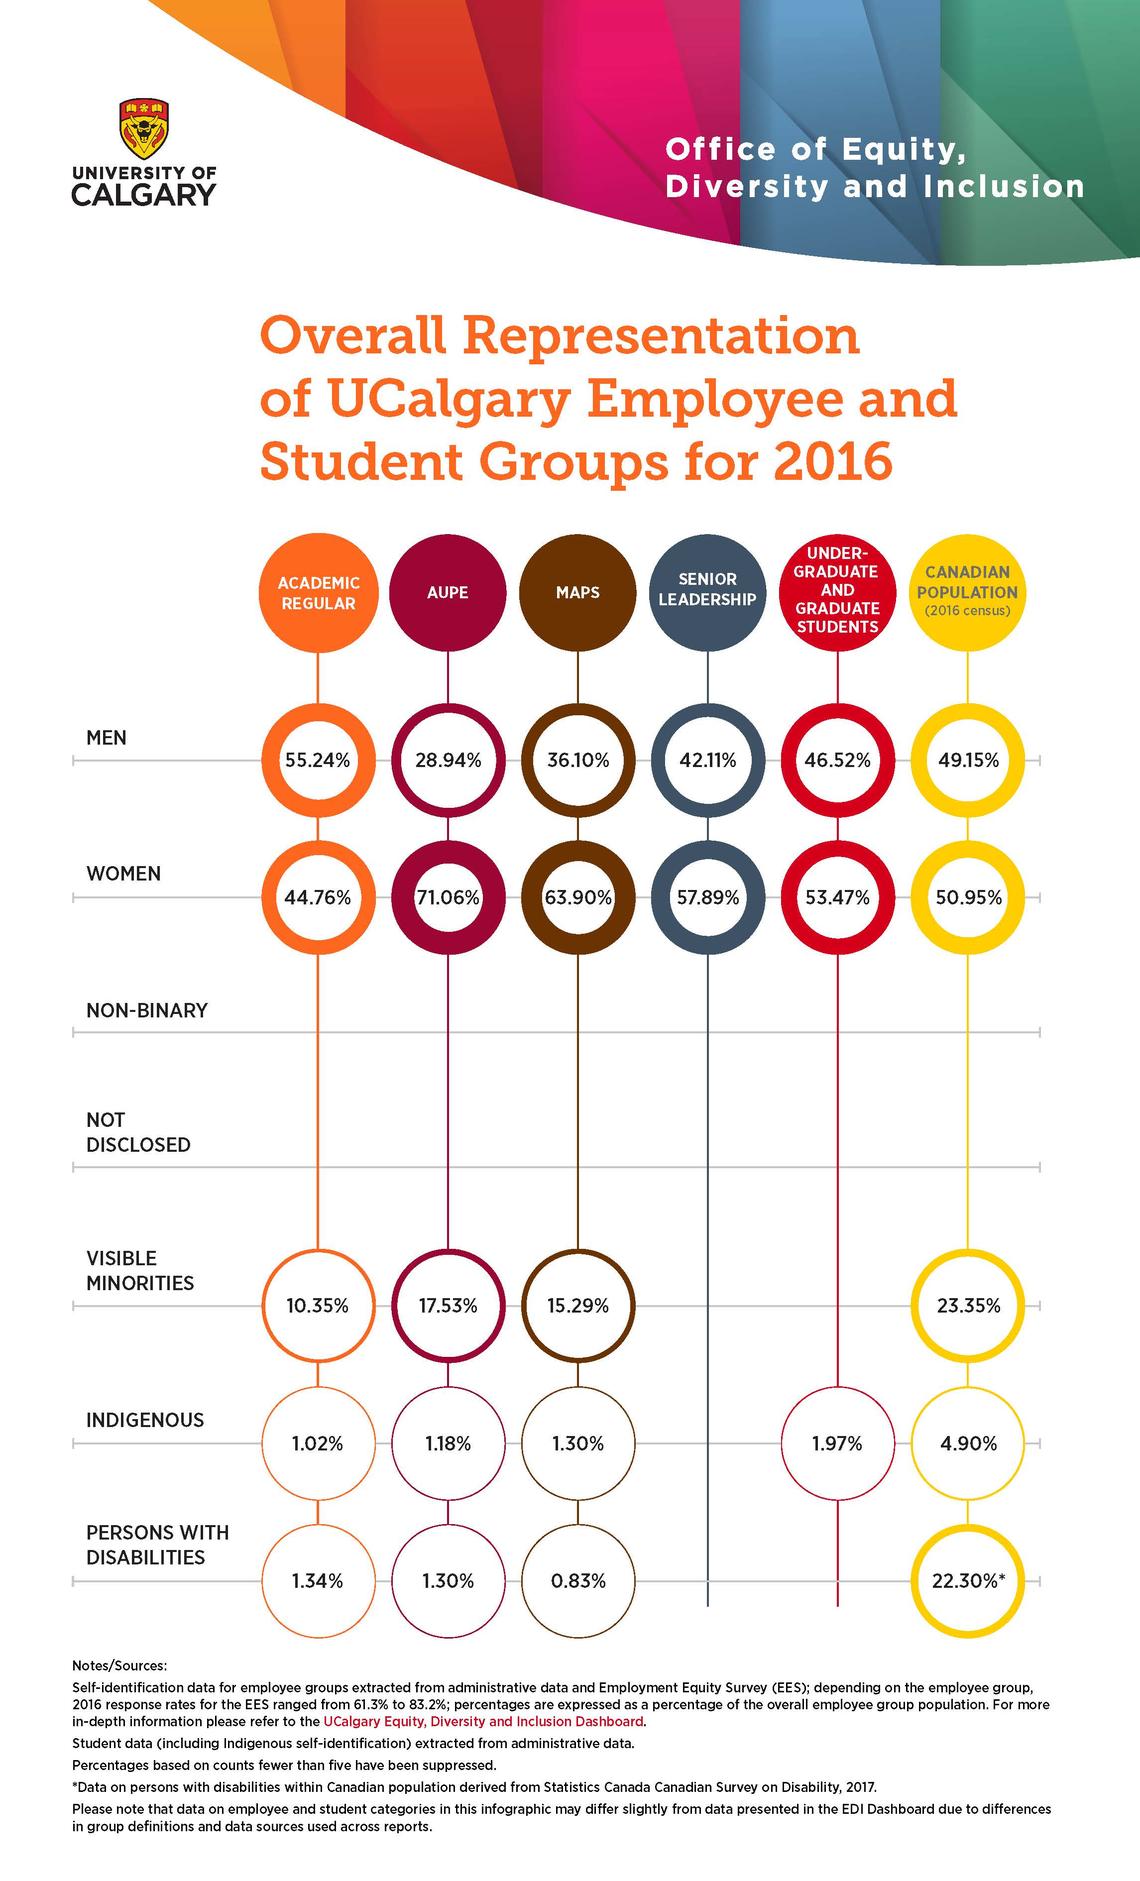 Overall Representation of UCalgary Employee and Student Groups for 2016